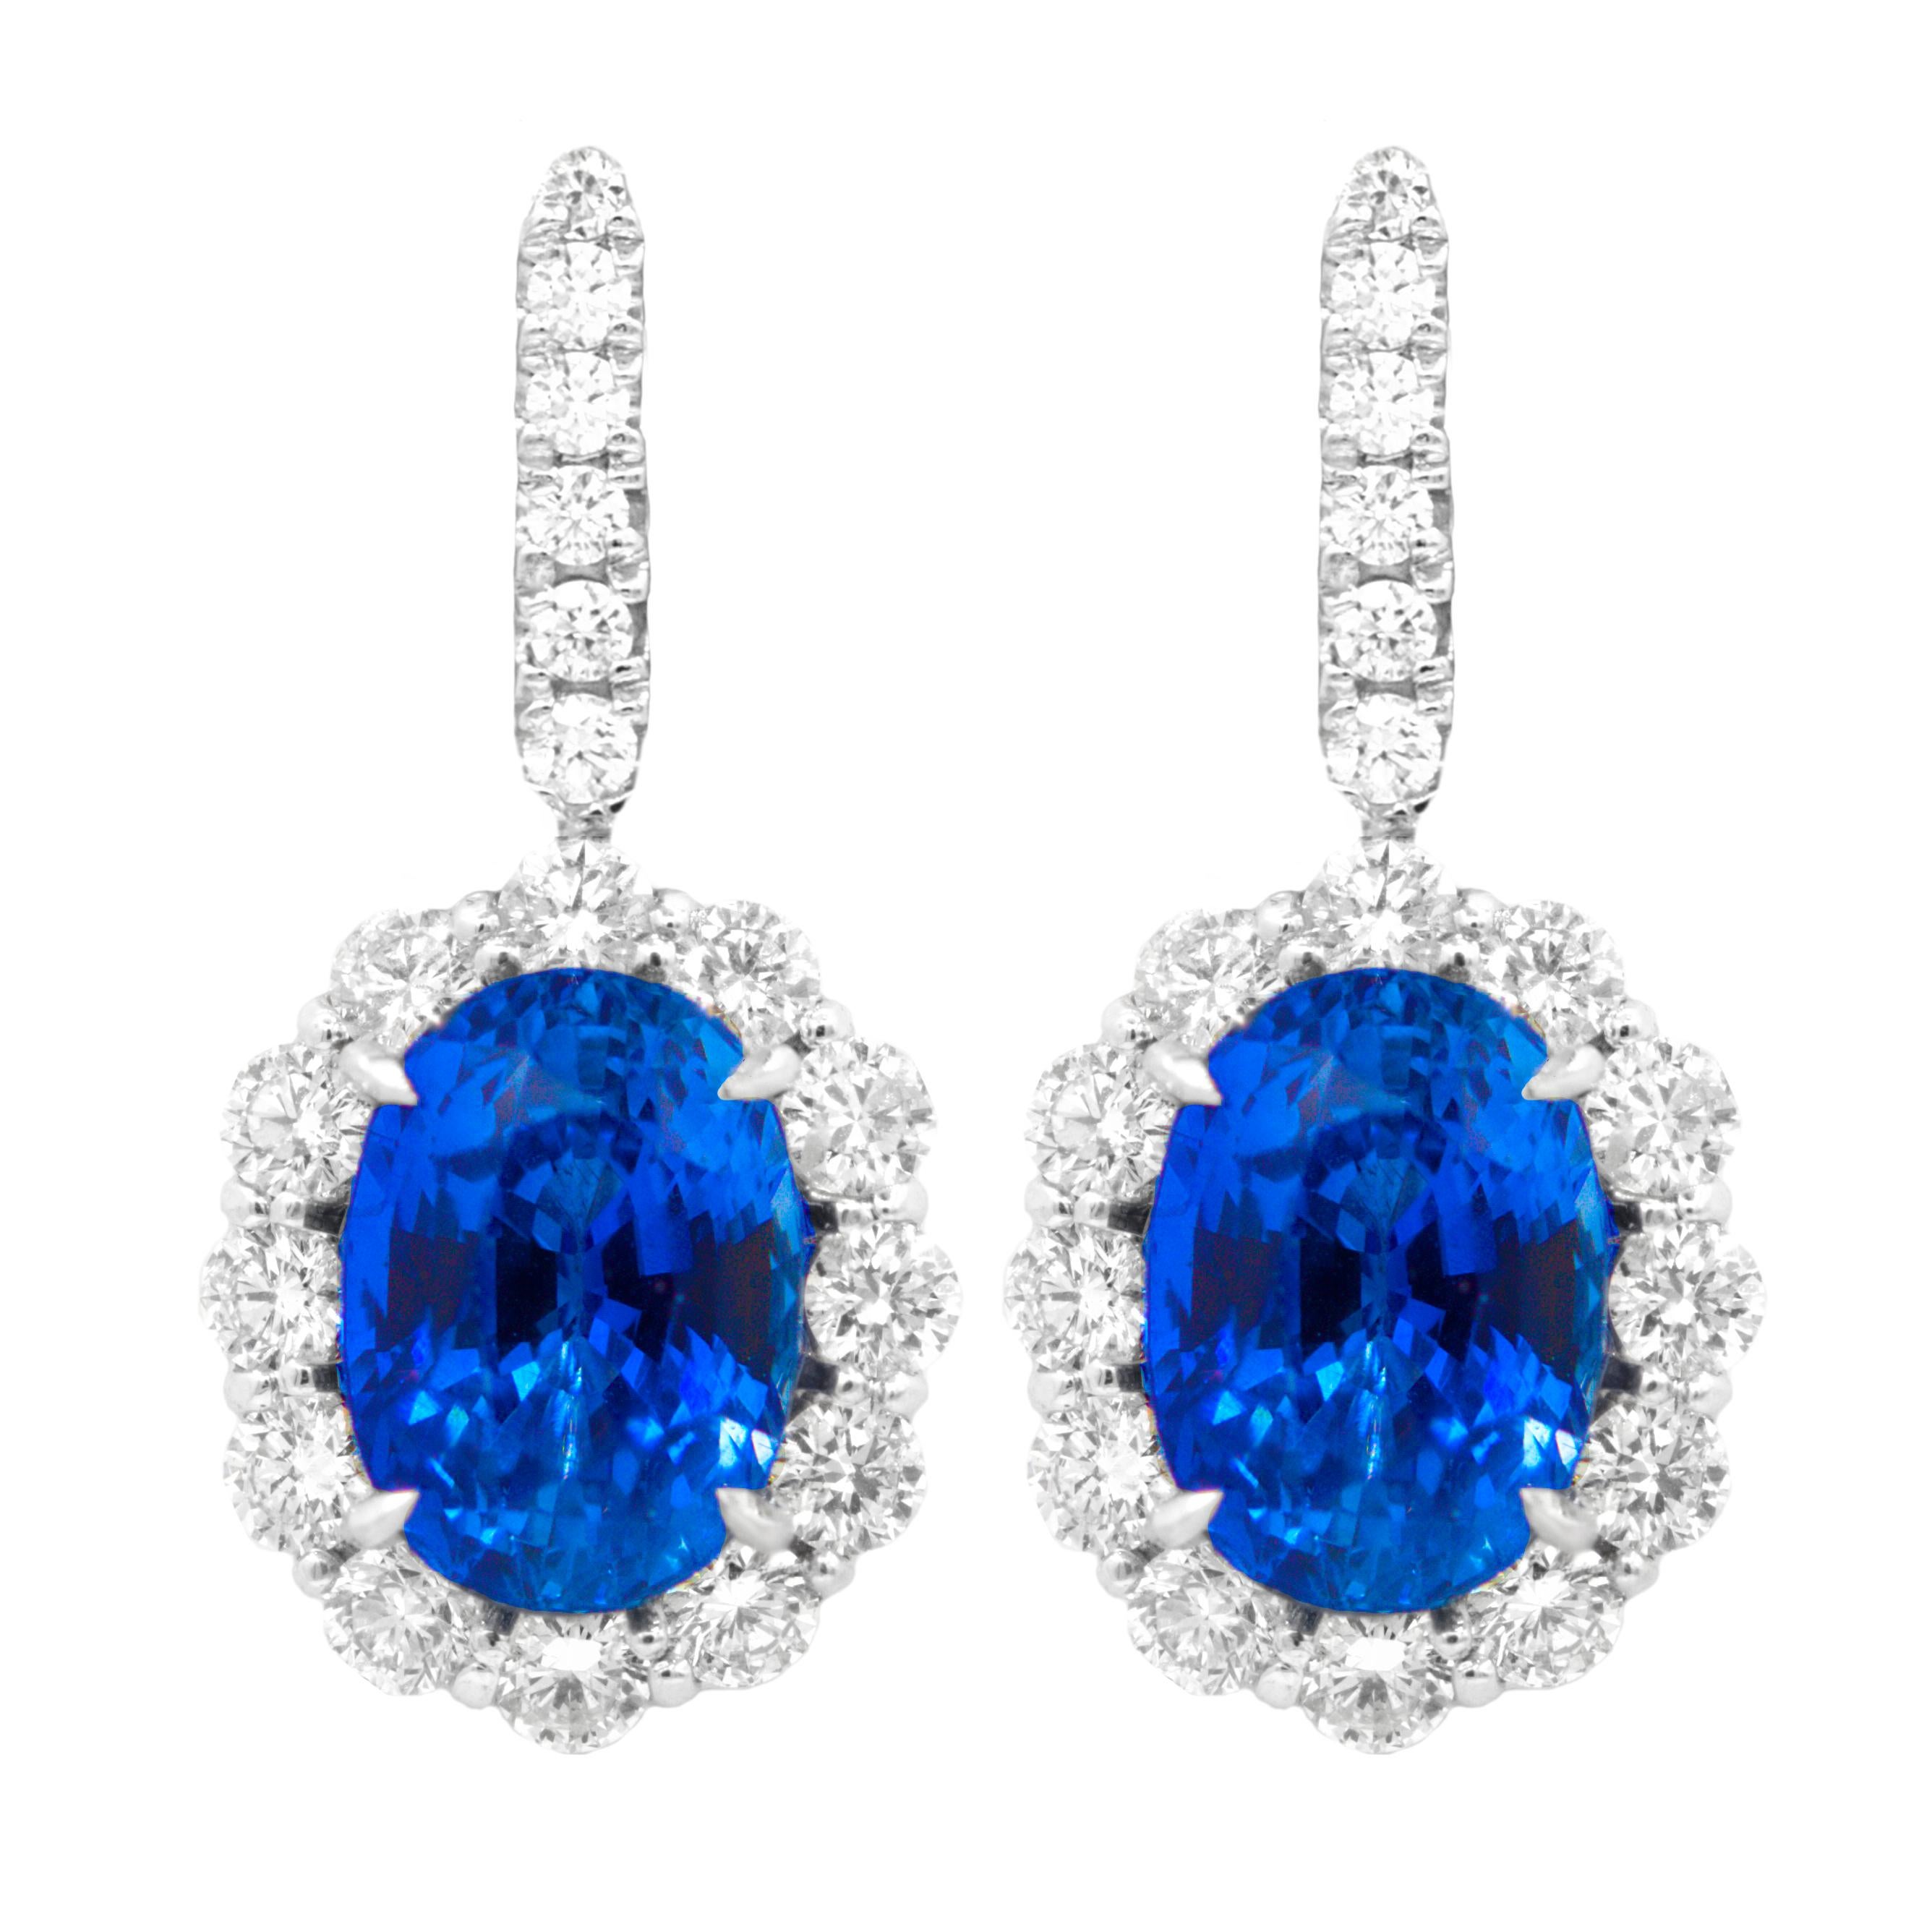 Diana M. Sapphire Diamond Earring with GIA Certified Violetish Blue Sapphires